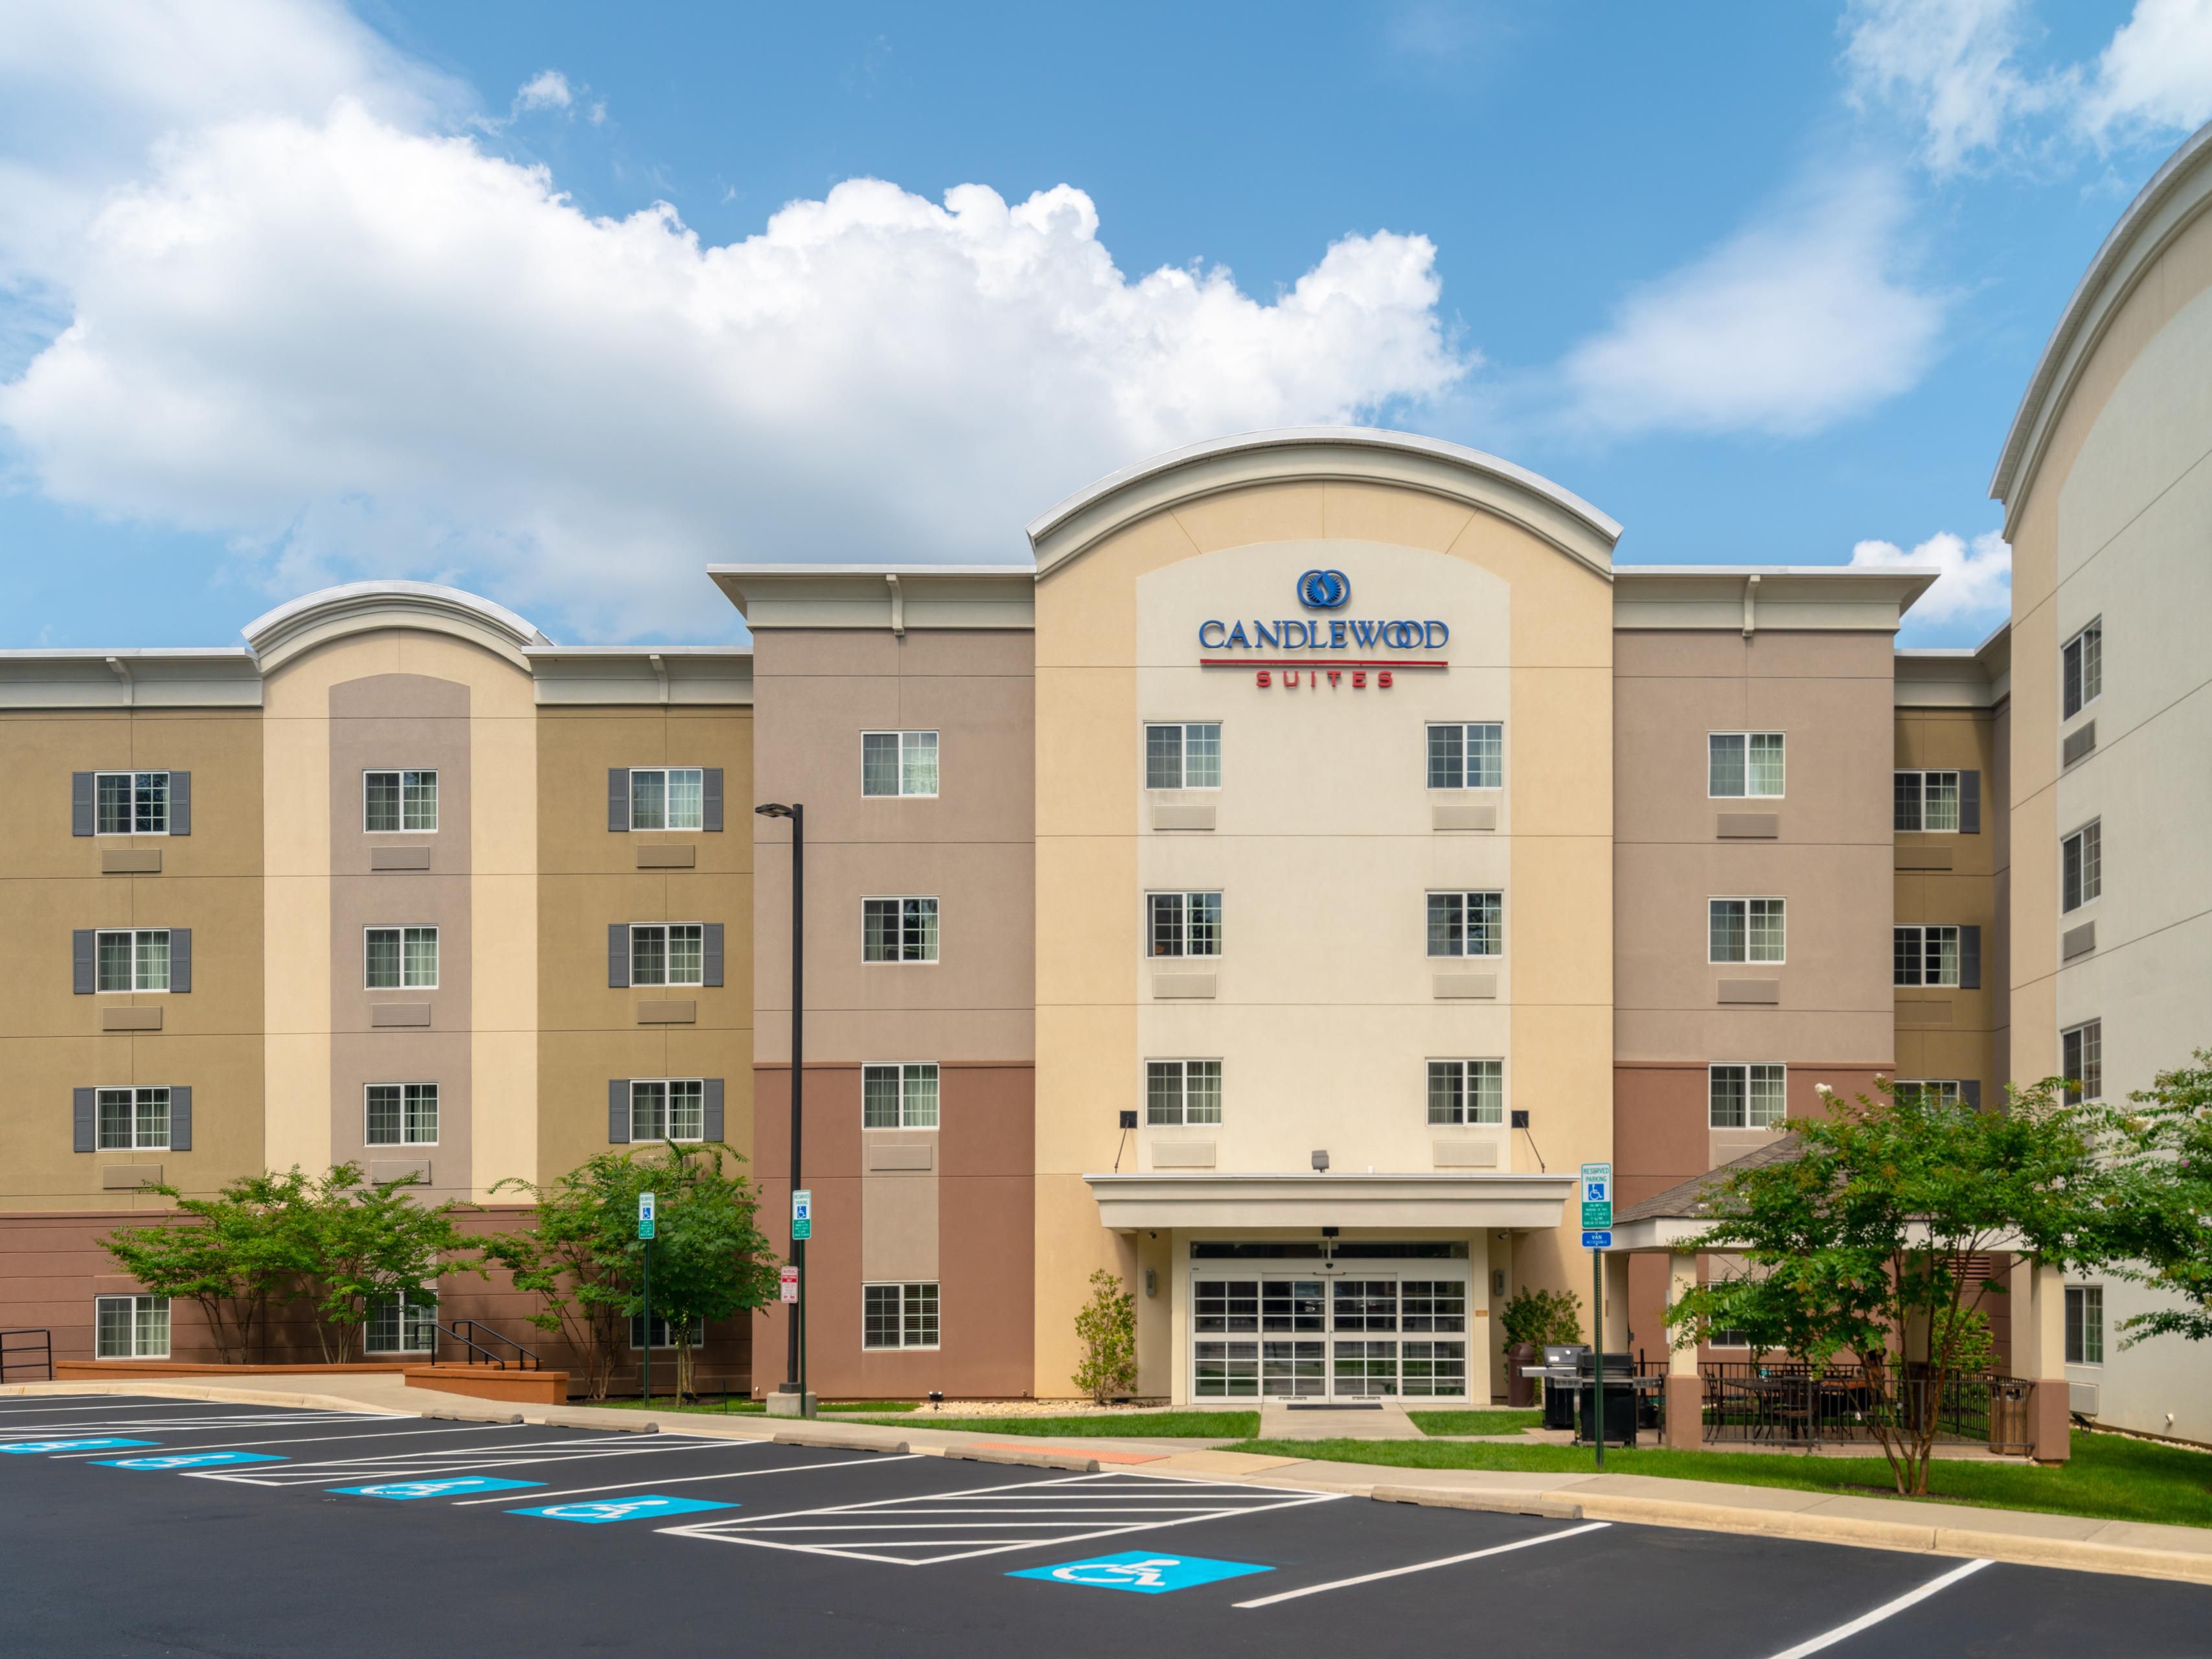 Candlewood Suites Hanover 5665962719 4x3